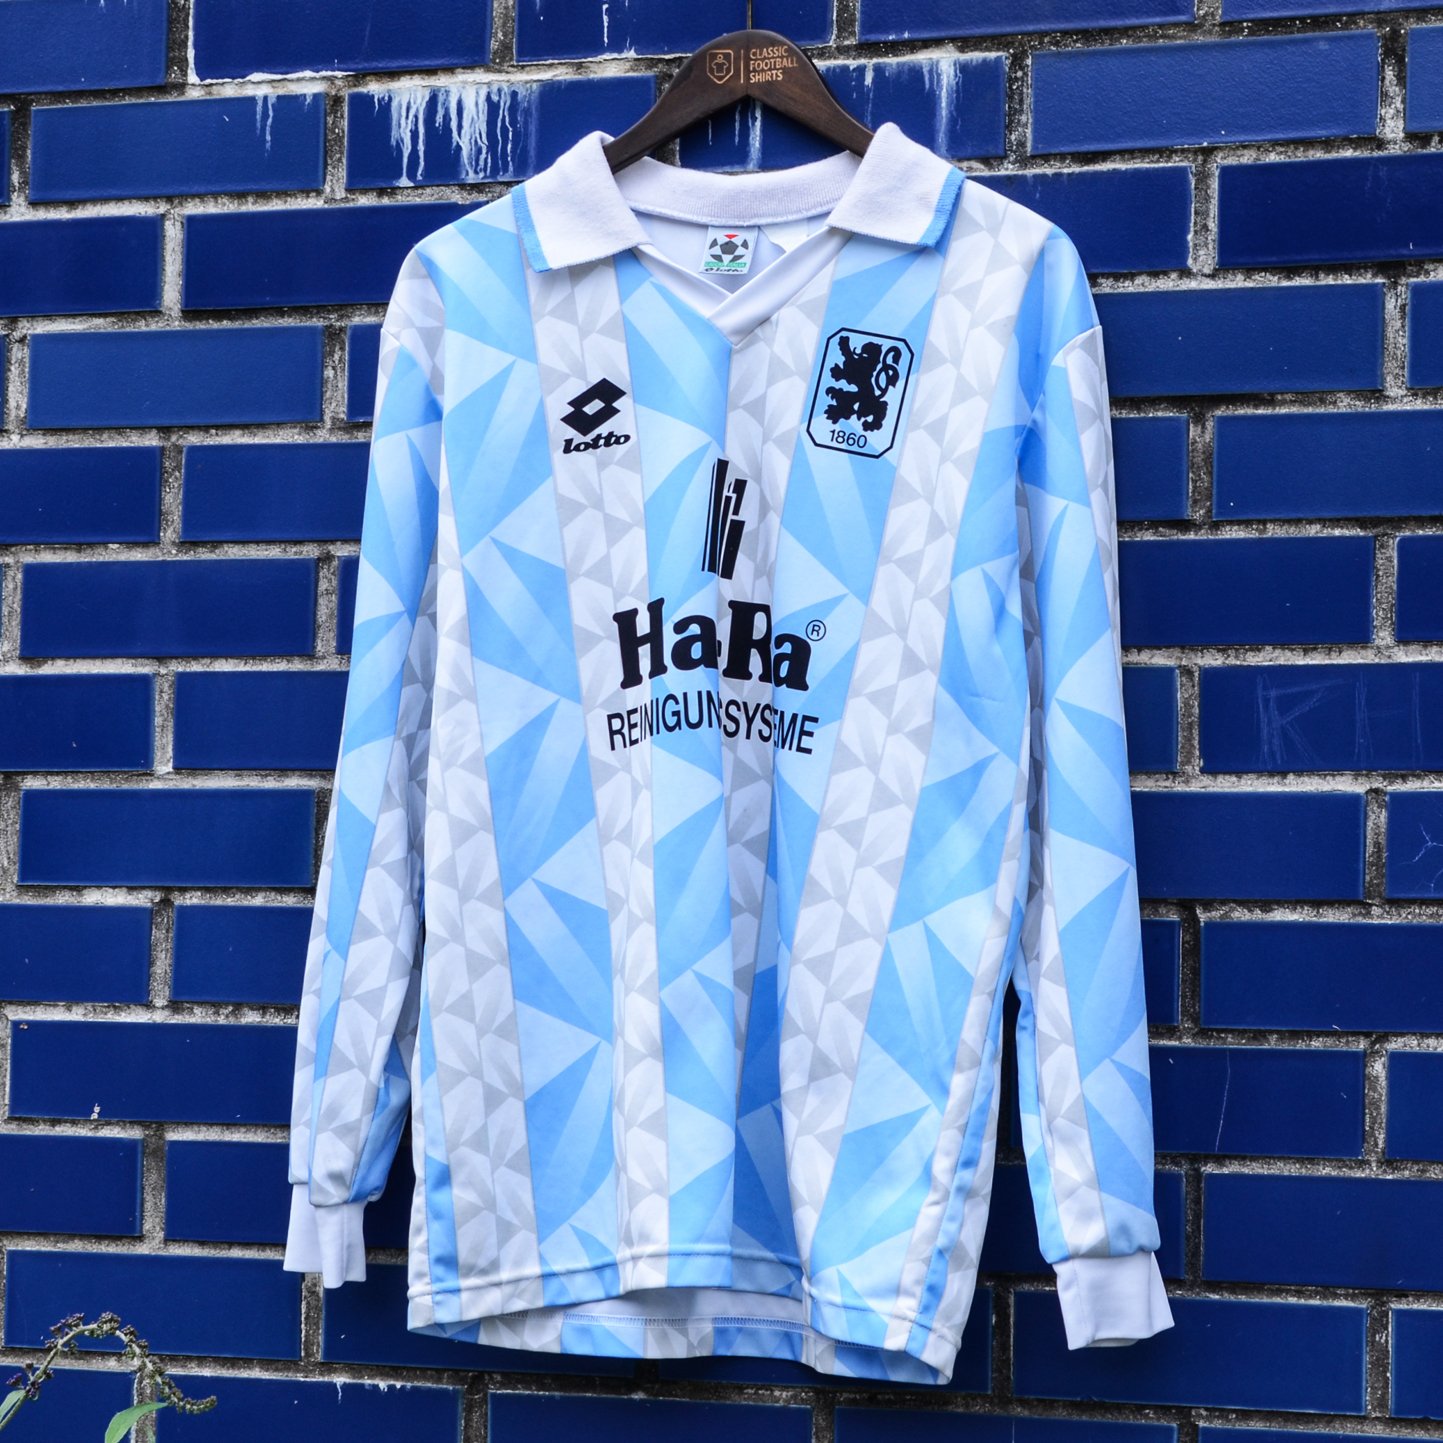 Classic Football Shirts on X: 1860 Munich Jacket from Lotto 🇩🇪 The  Crest. The Pattern. The Colour Scheme. Dropping on the site soon 👀   / X